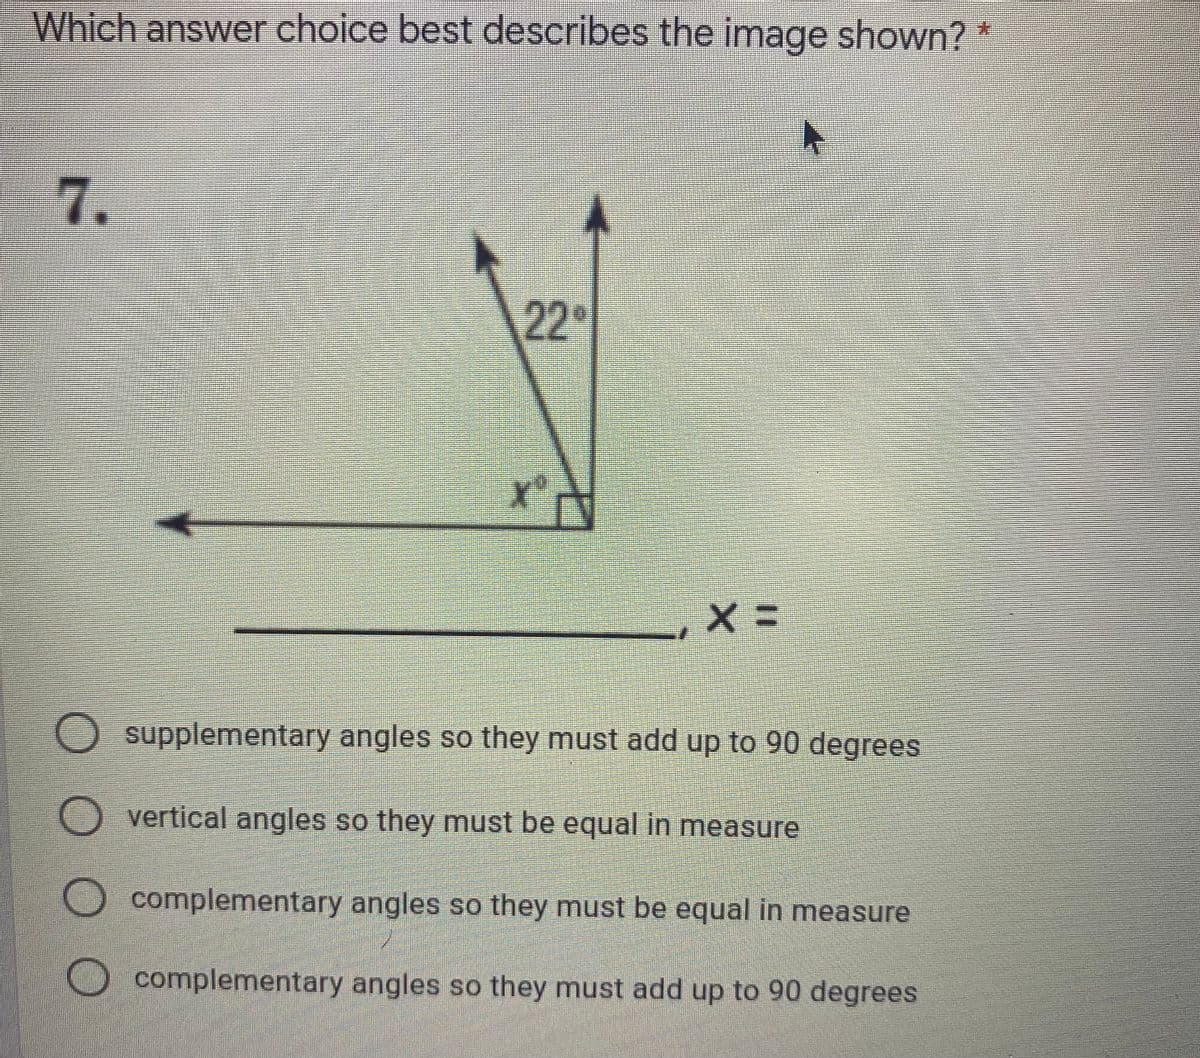 Which answer choice best describes the image shown? *
7.
22°
supplementary angles so they must add up to 90 degrees
vertical angles so they must be equal in measure
complementary angles so they must be equal in measure
complementary angles so they must add up to 90 degrees
O O O
